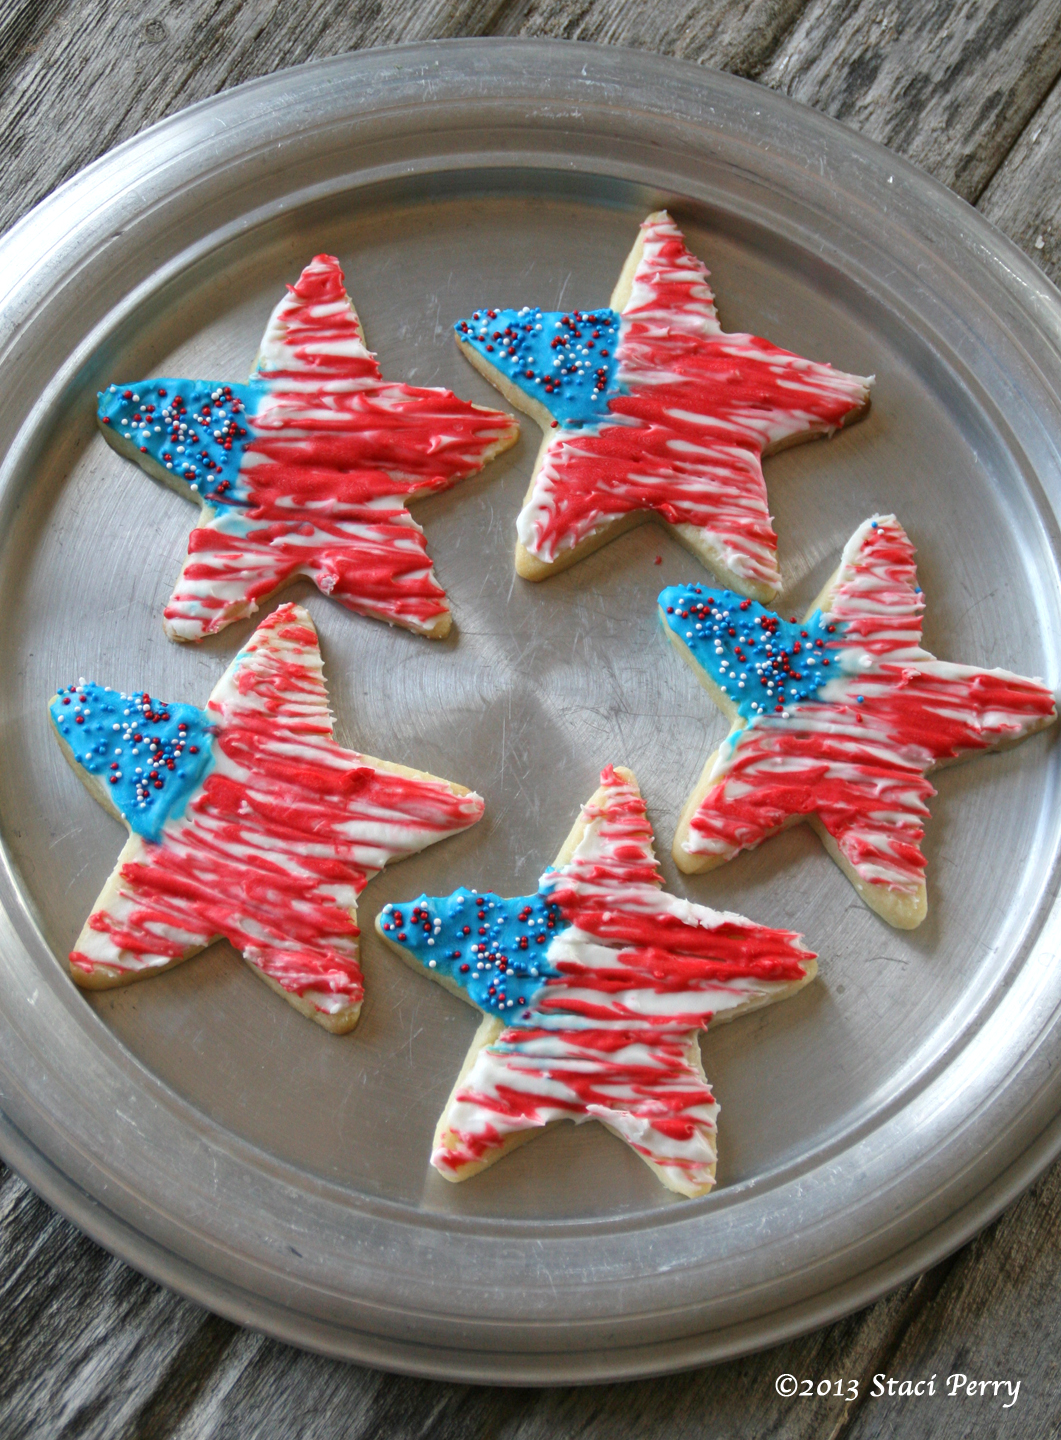 9 Recipes That Will Knock the Flip-flops Off Your Fourth of July Party Guests